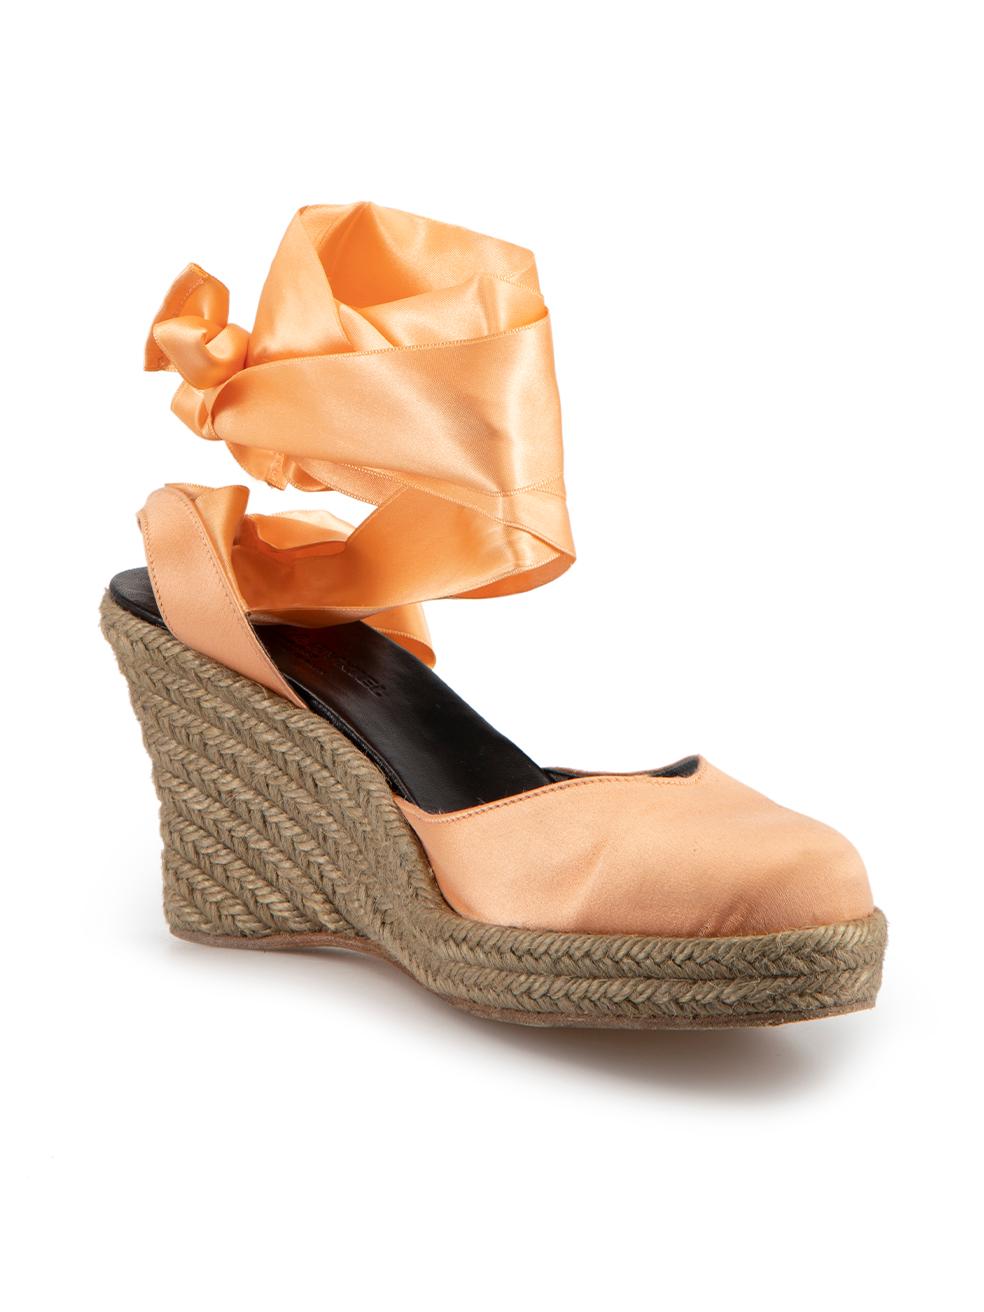 CONDITION is Very good. Minimal wear to espadrilles is evident. Minimal pulls to satin on toe cap of this used Sonia Rykiel designer resale item.



Details


Salmon orange

Satin

Espadrille wedges

Round-toe

Ribbon wrap around lace-up